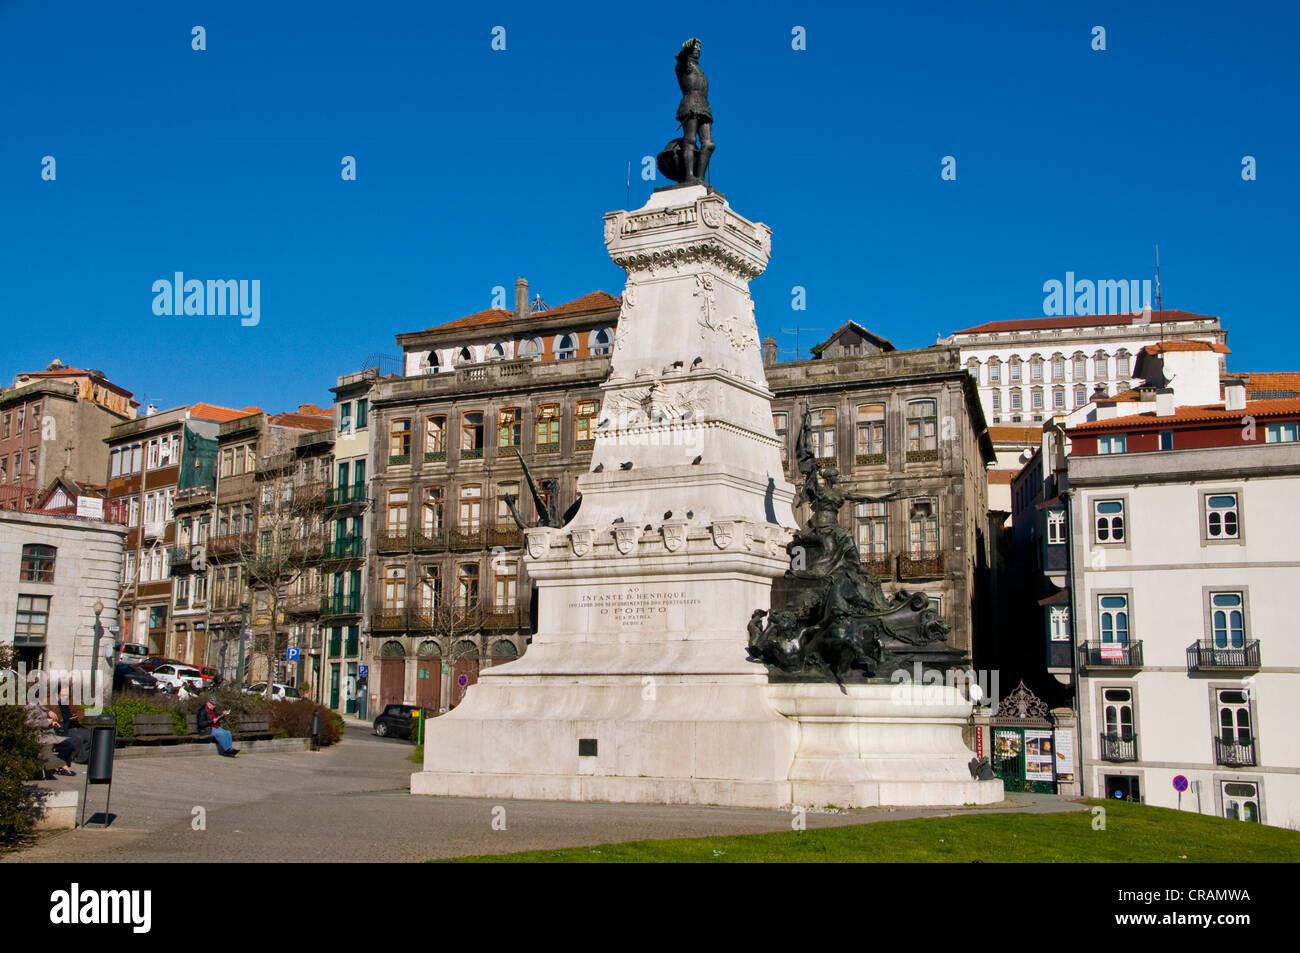 Statue of Infante D. Henrique or Henry the Navigator on the Praca do Infante square in the old town, UNESCO World Heritage Site Stock Photo